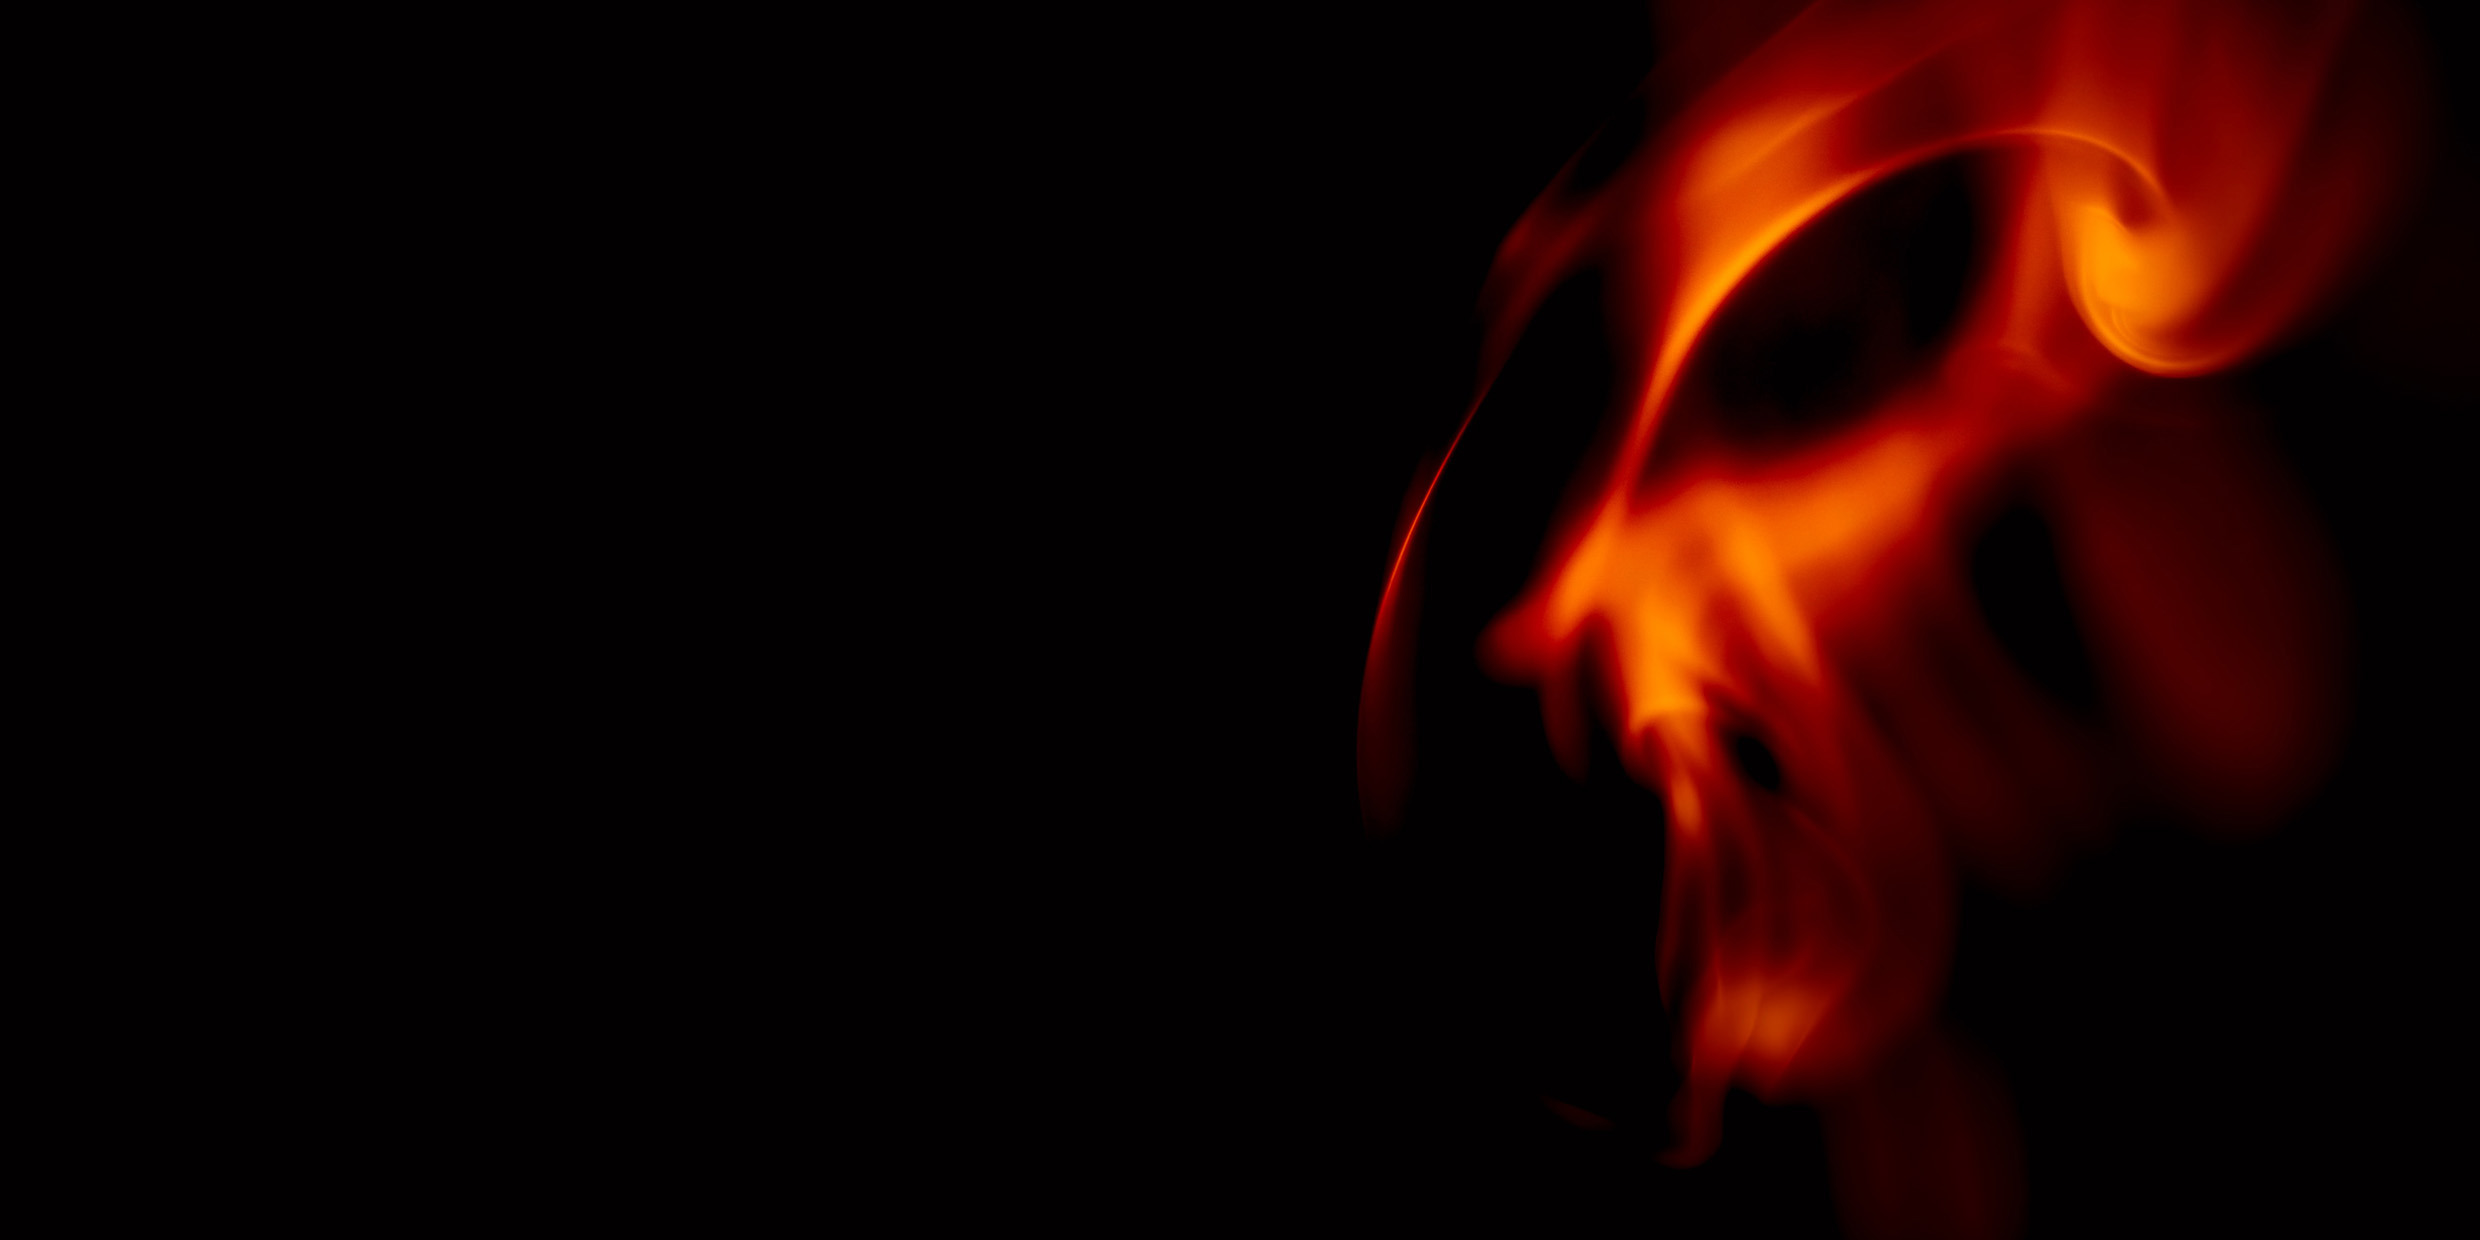 Image of orange flames on a black background that is evocative of the face of an infernal being